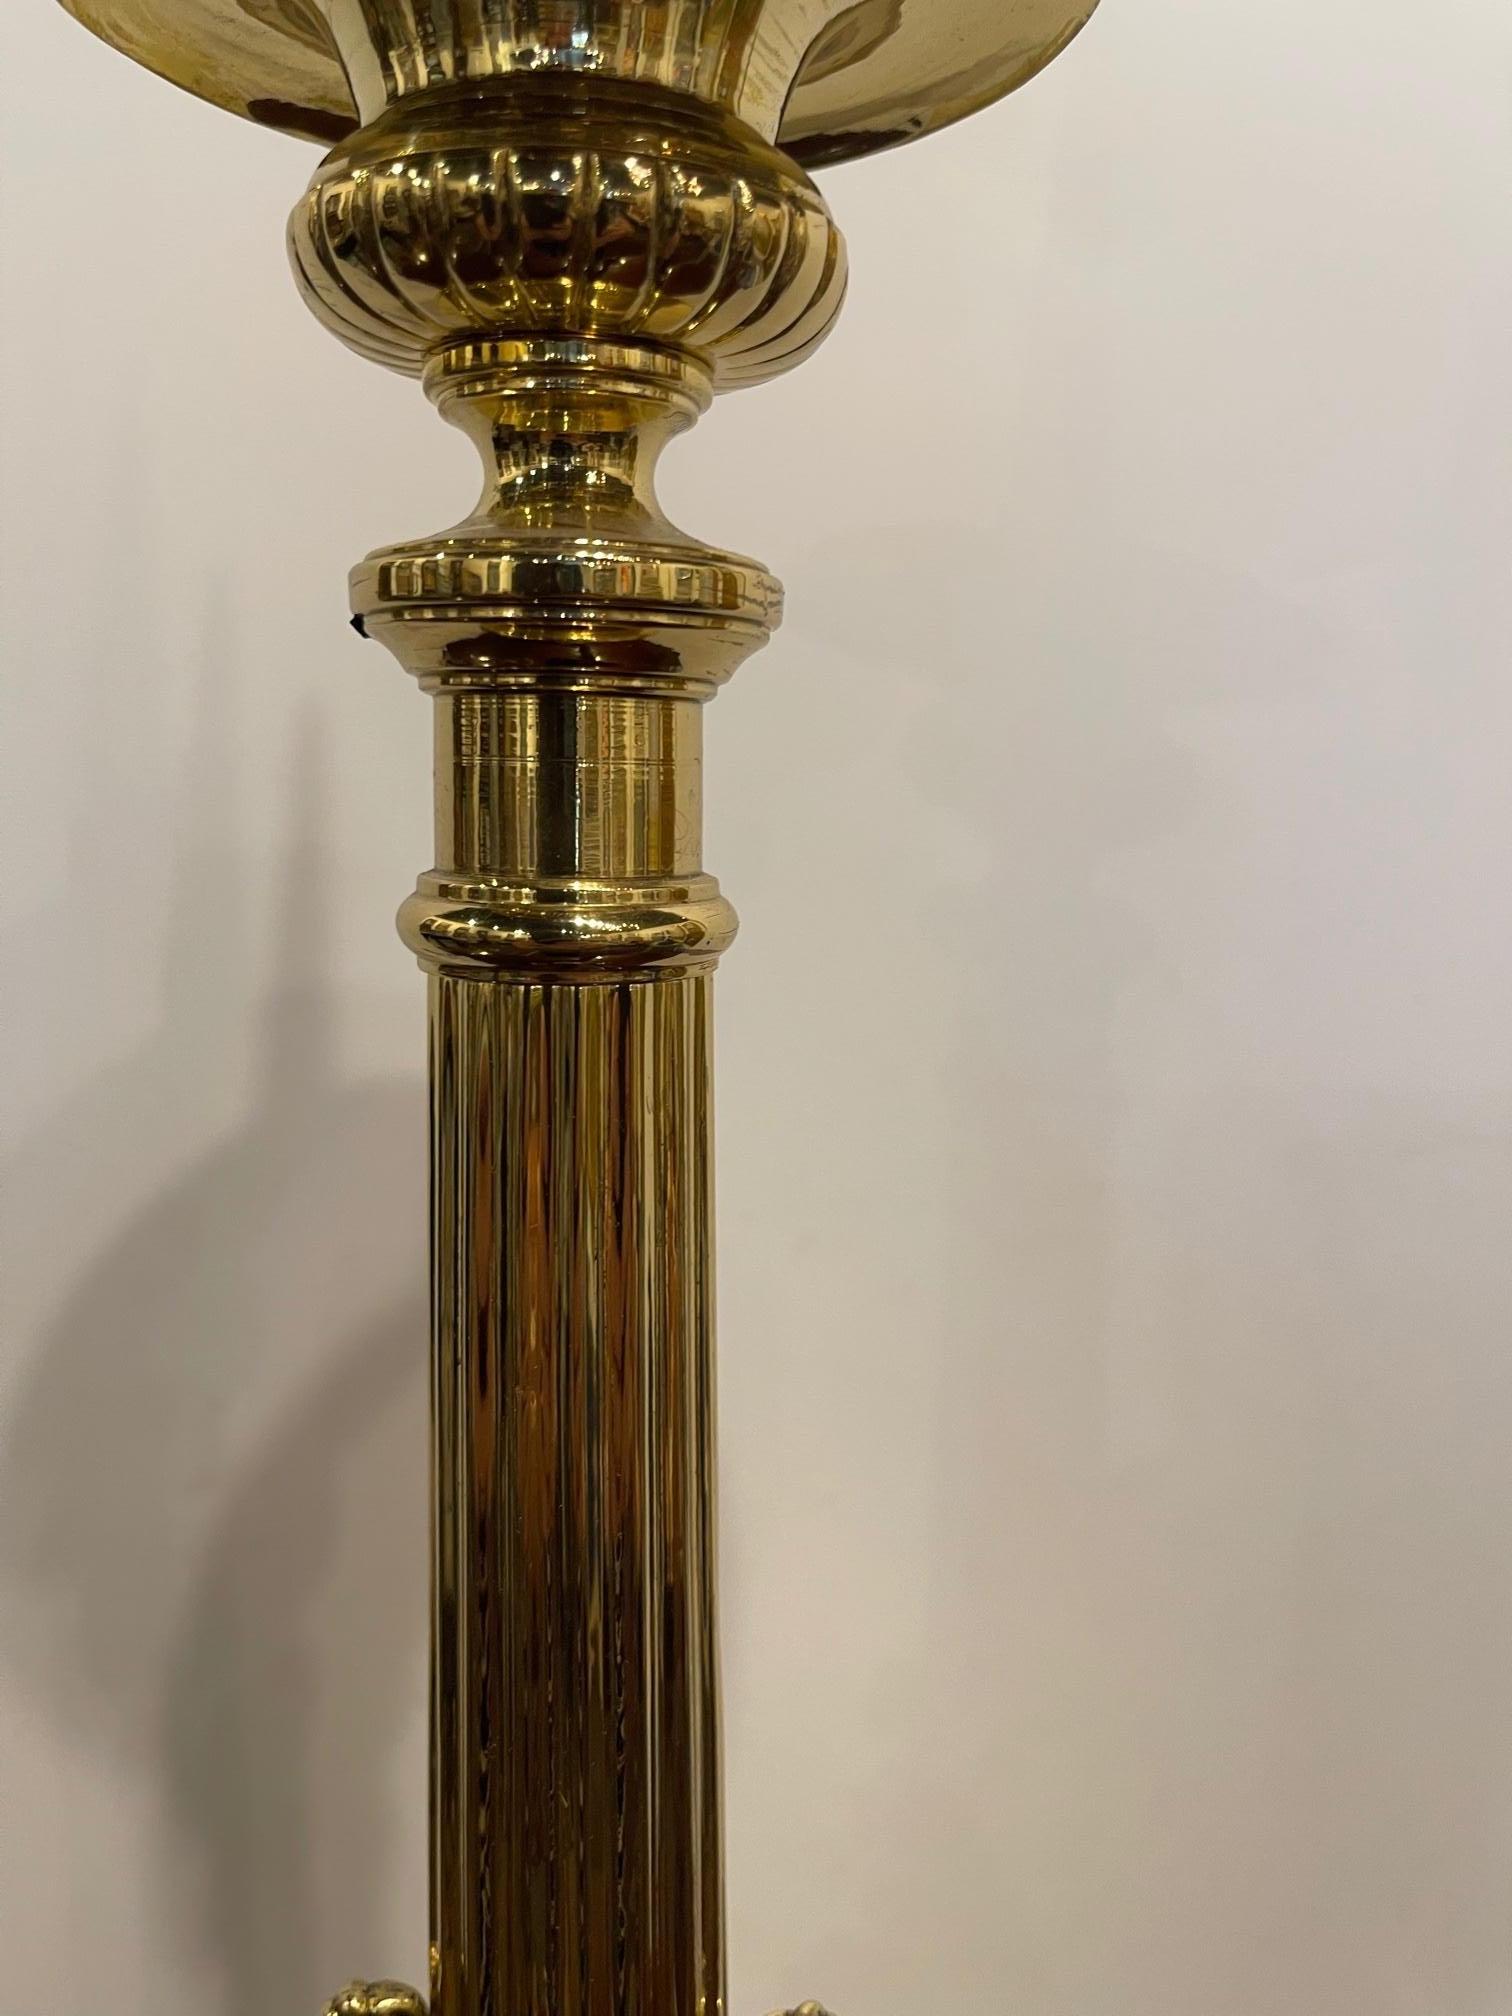 French Polished Brass Decorative Pricket or Candlestick, 19th Century For Sale 2